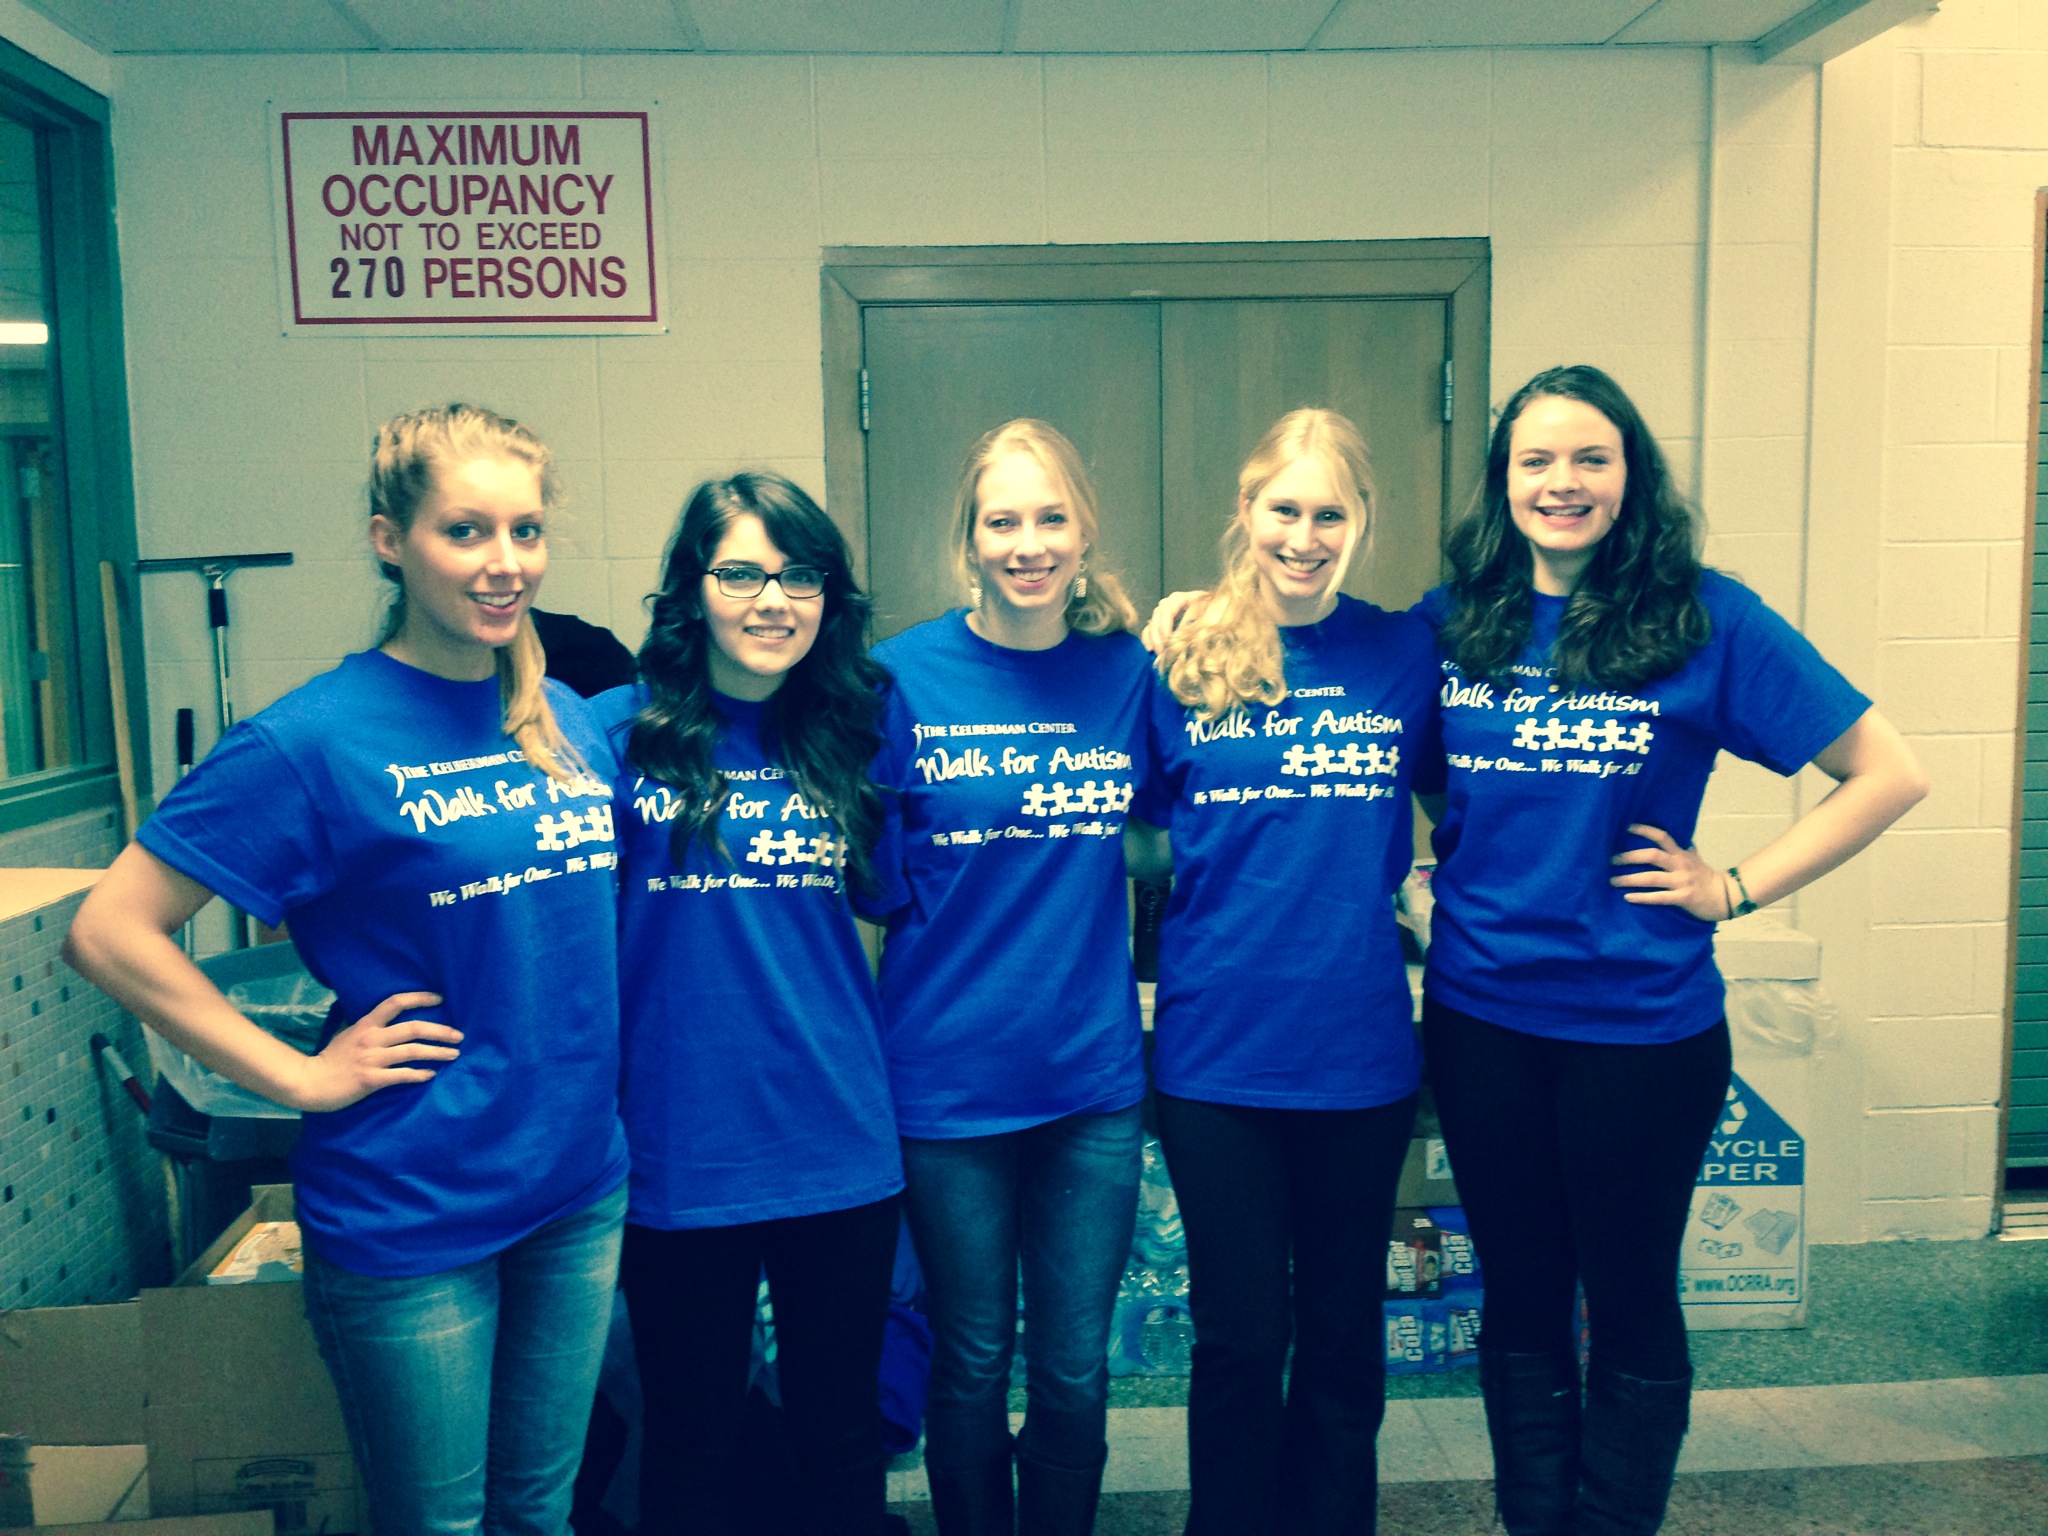 Members of Psi Chi volunteered at the Walk for Autism fundraiser in Oneida.